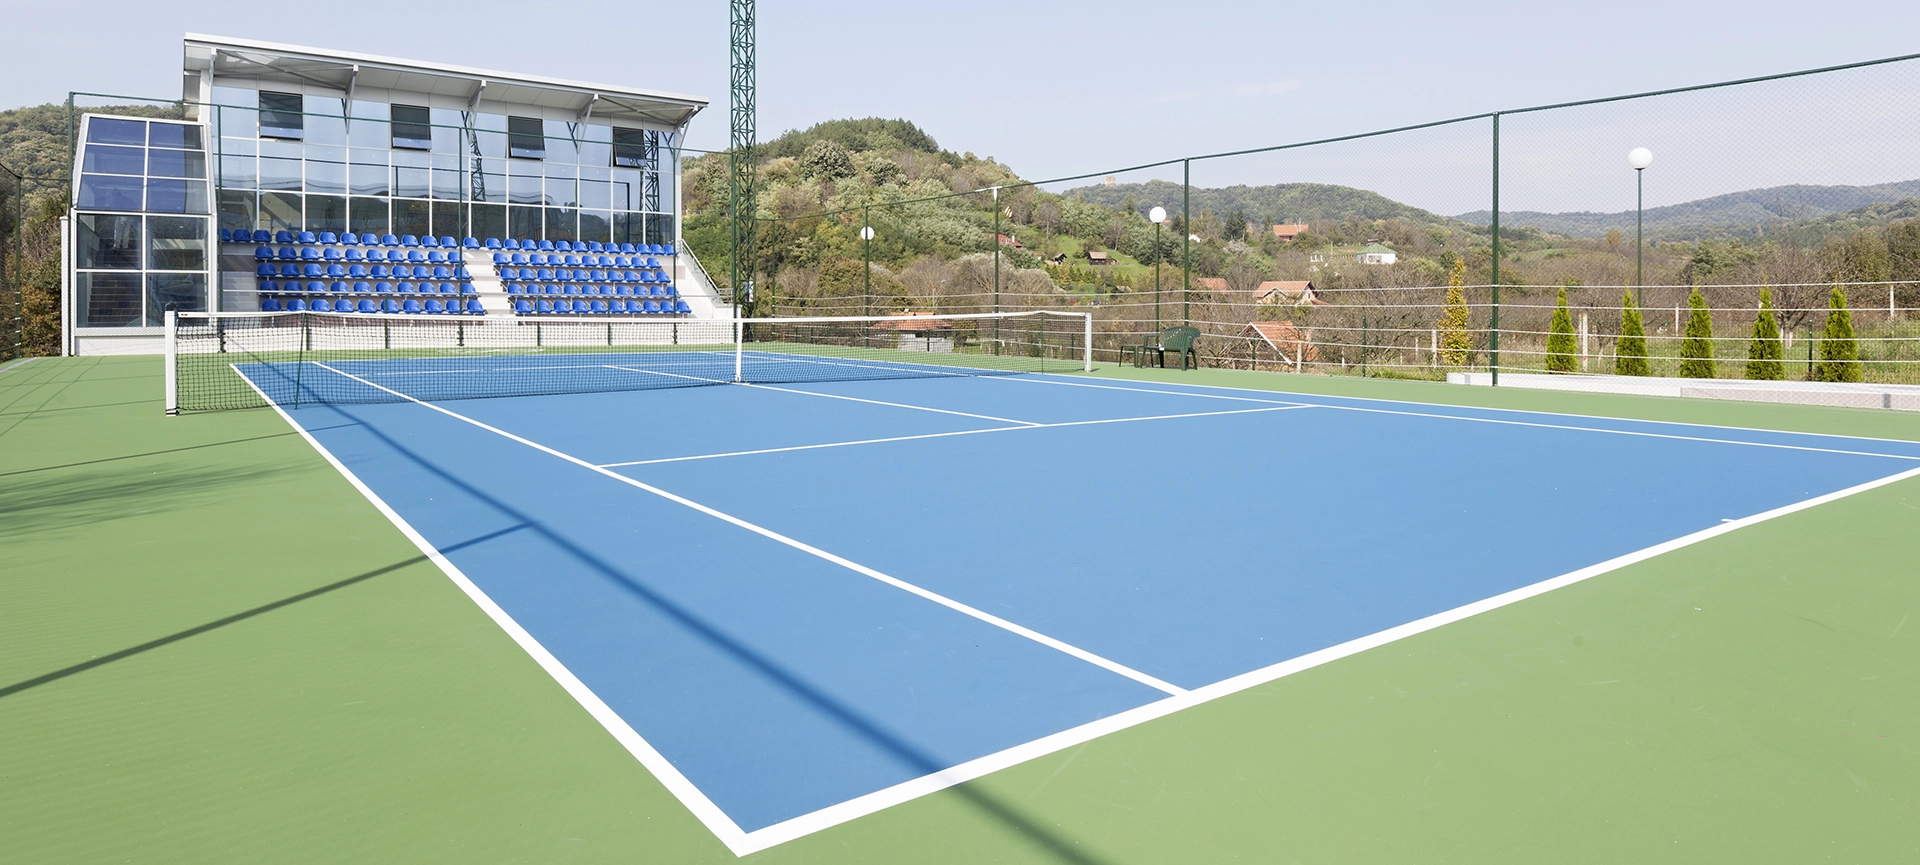 acrylic tennis court surfaces